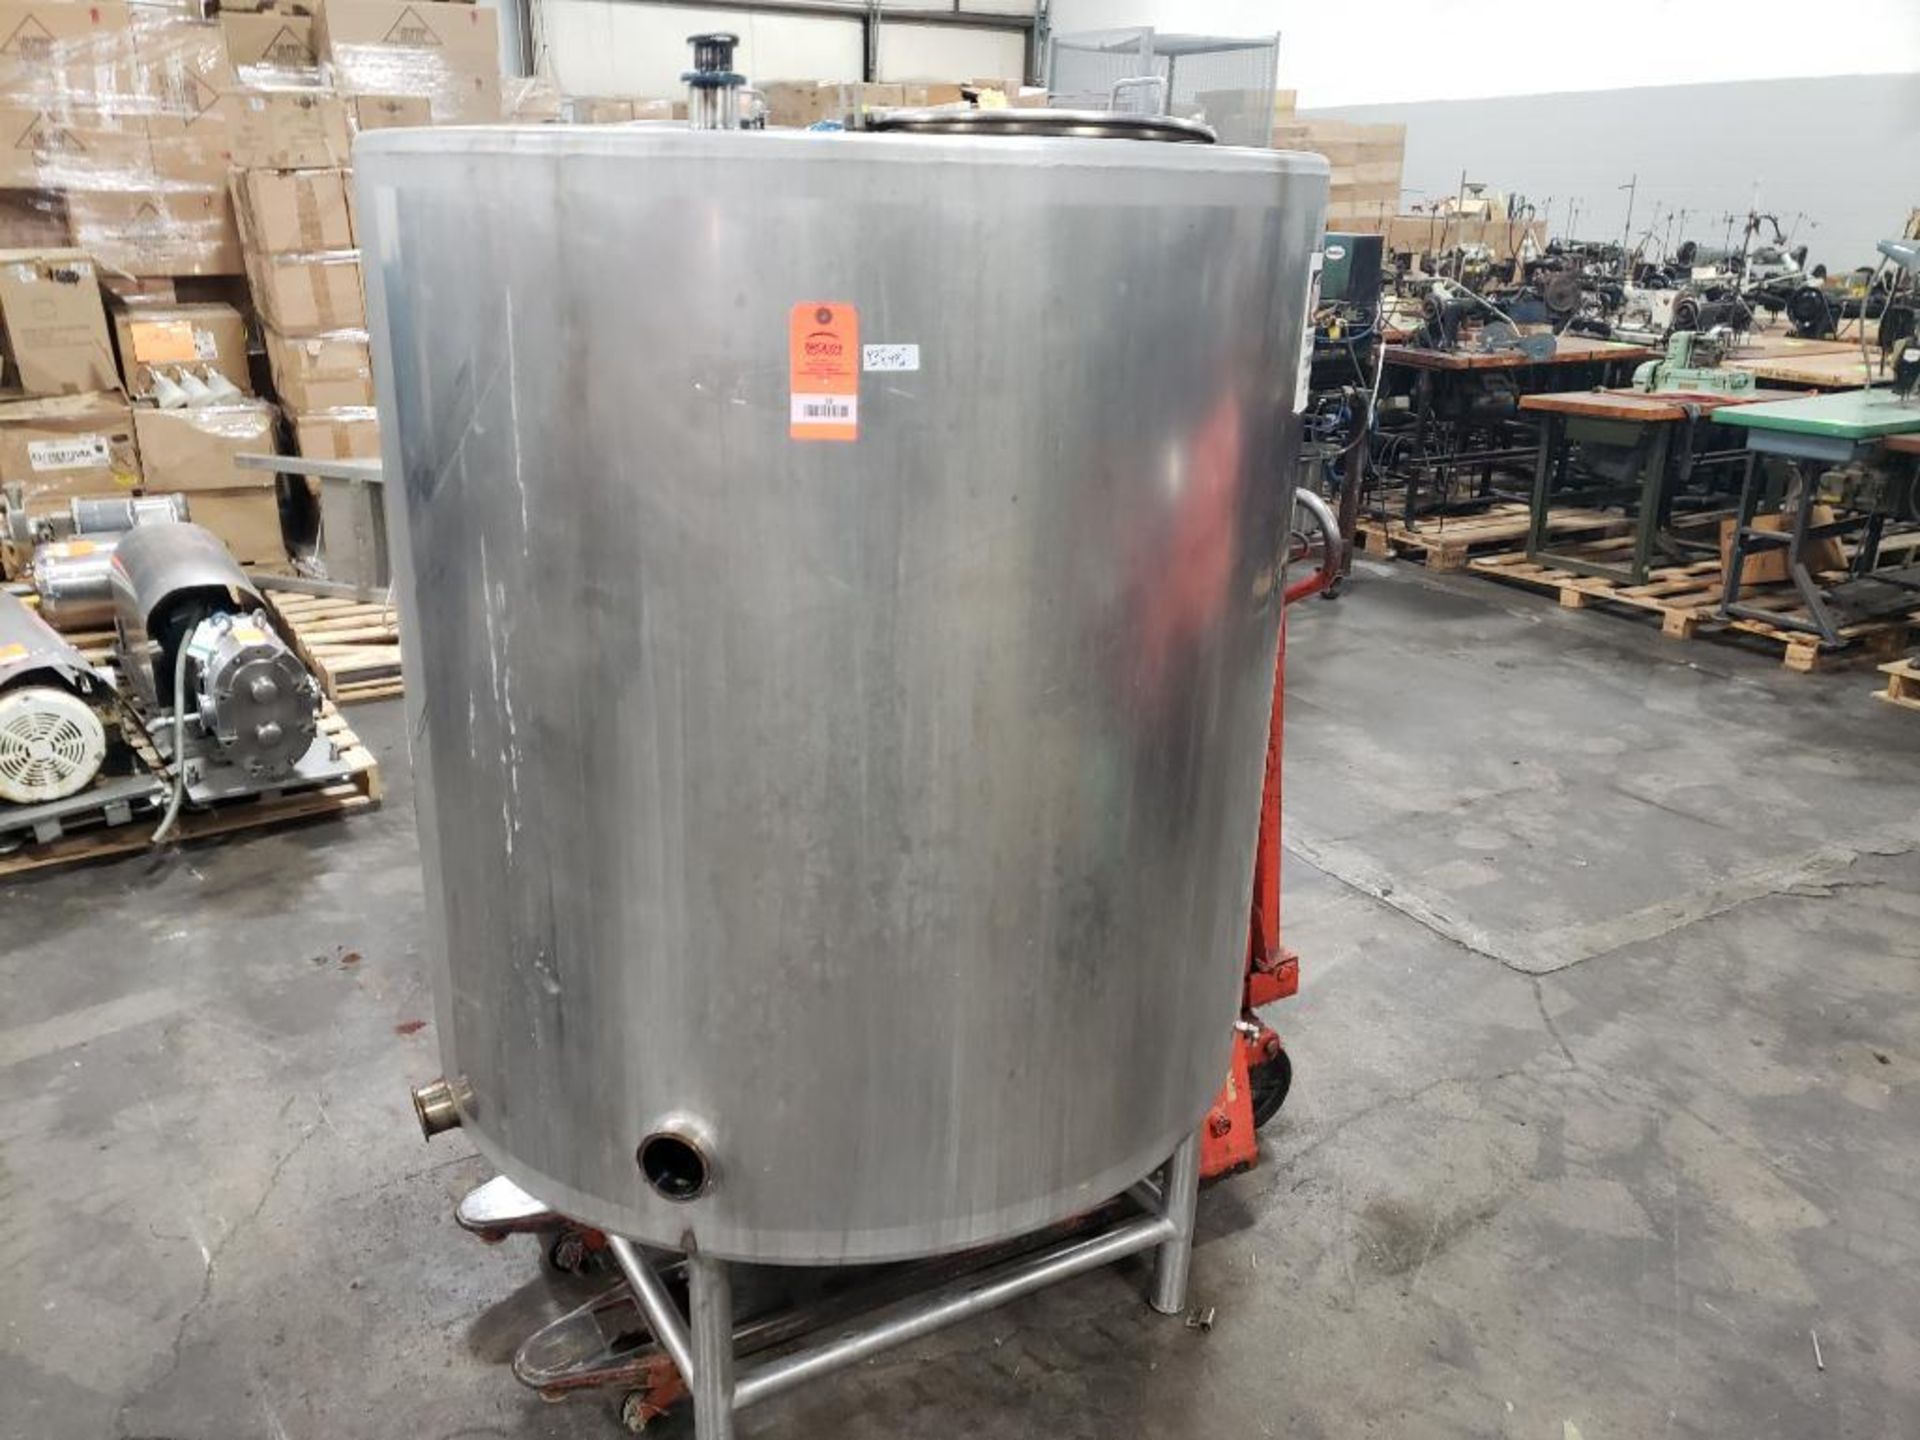 Approx 350 gallon Stainless steel holding tank. Approx dimensions 47in wide by 48in tall.